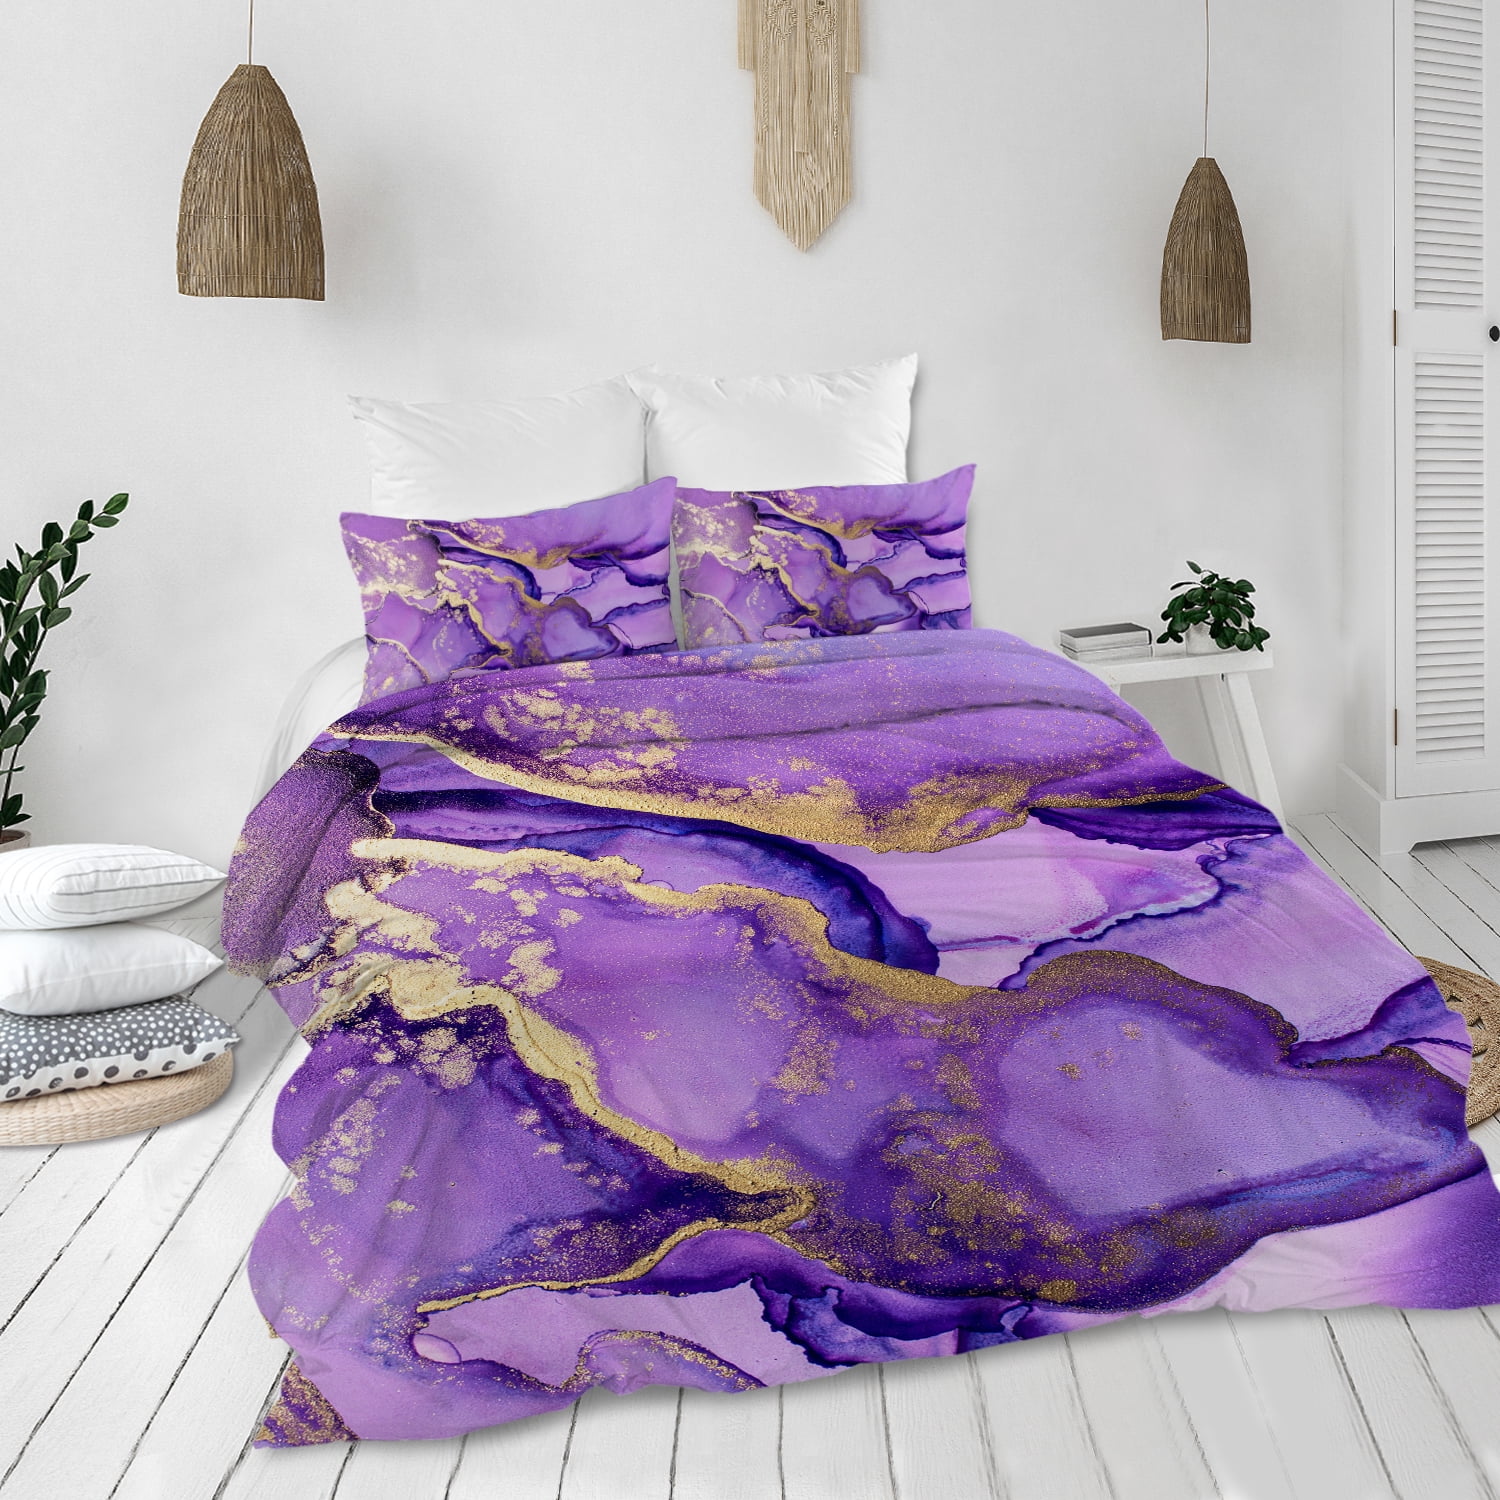 Marbling Pattern Bed Sheet Cover Dust Mattress Protector Nonslip Bedspread Decor 